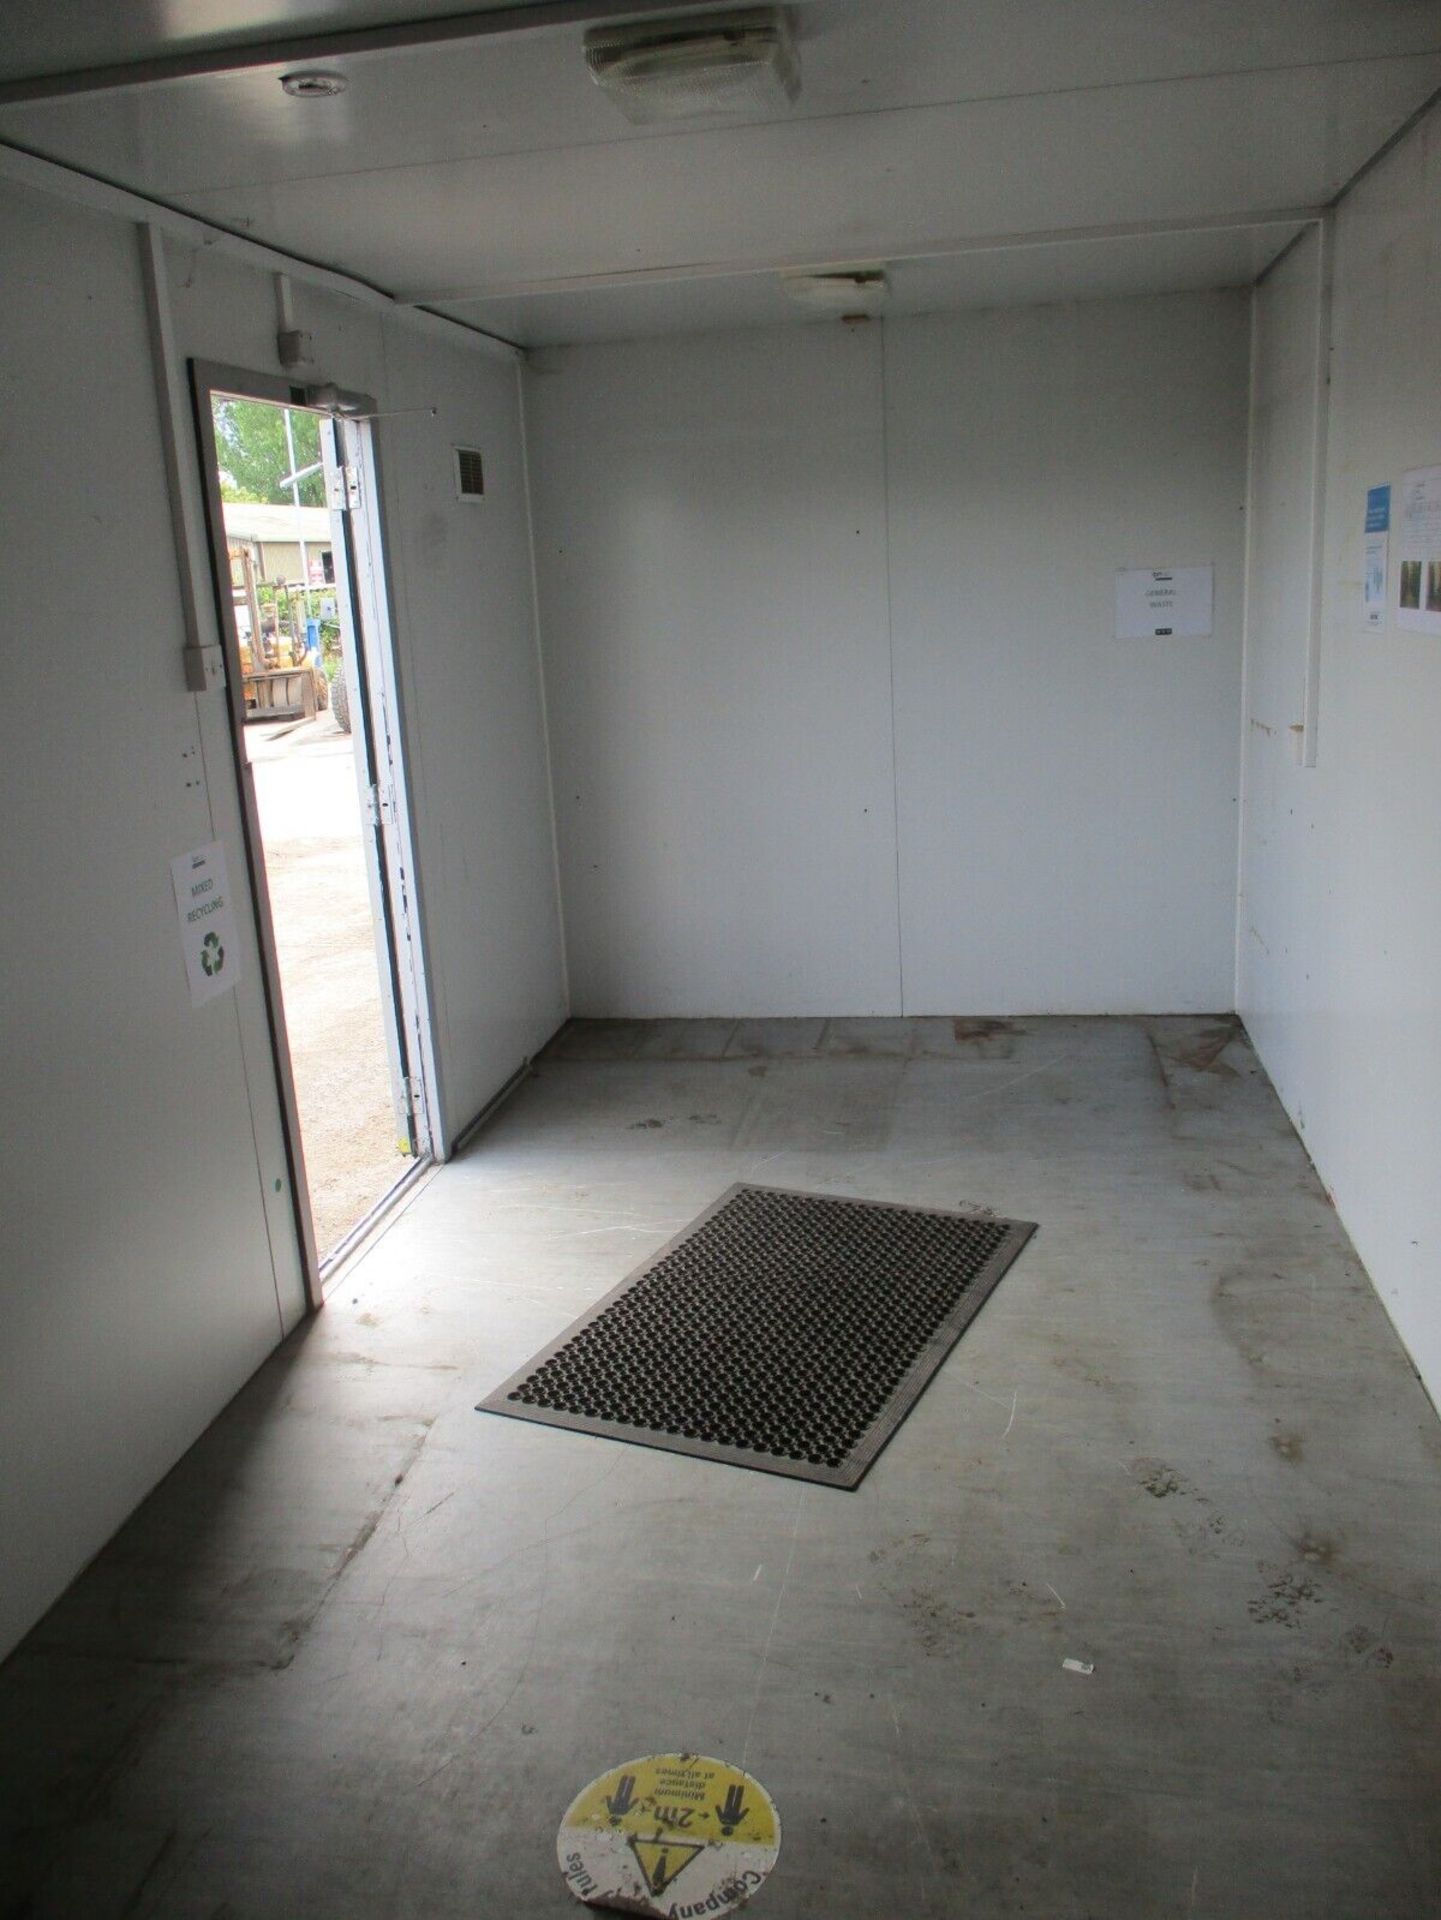 20X8FT SECURE SHIPPING CONTAINER: YOUR MOBILE OFFICE SPACE - Image 7 of 8